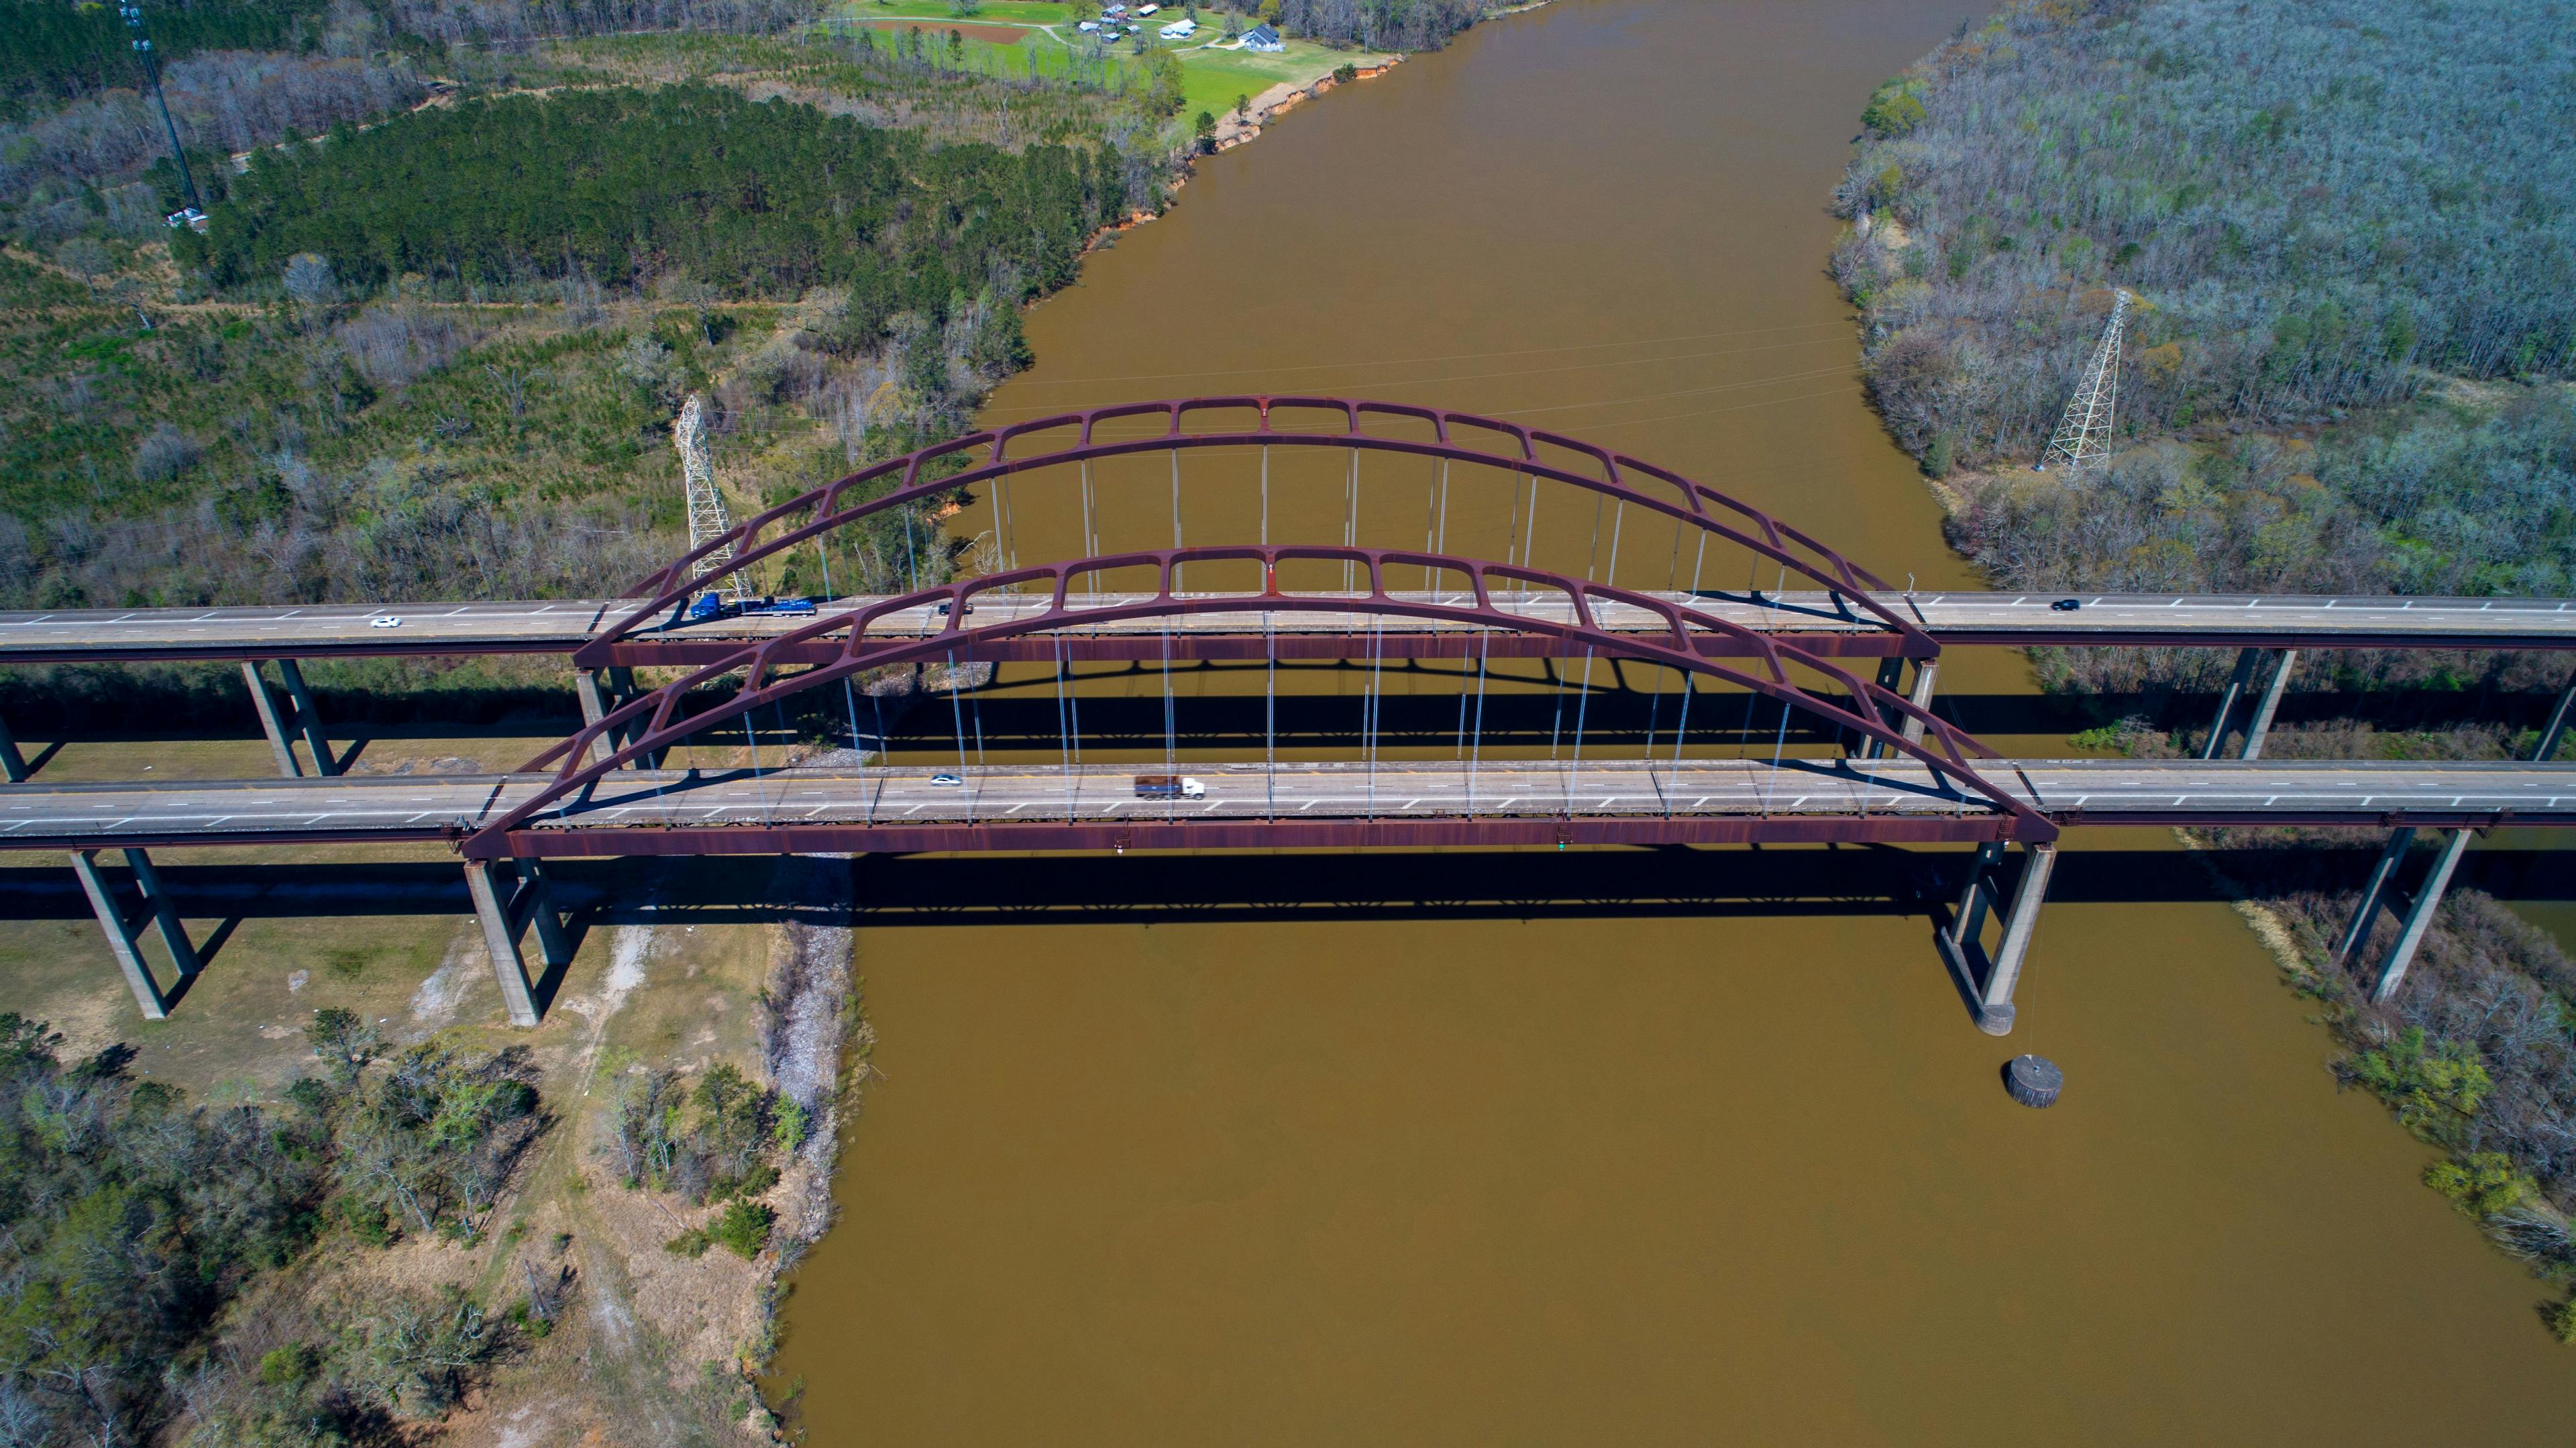 General W.K. Wilson Jr. Bridge from above with its two red perched atops